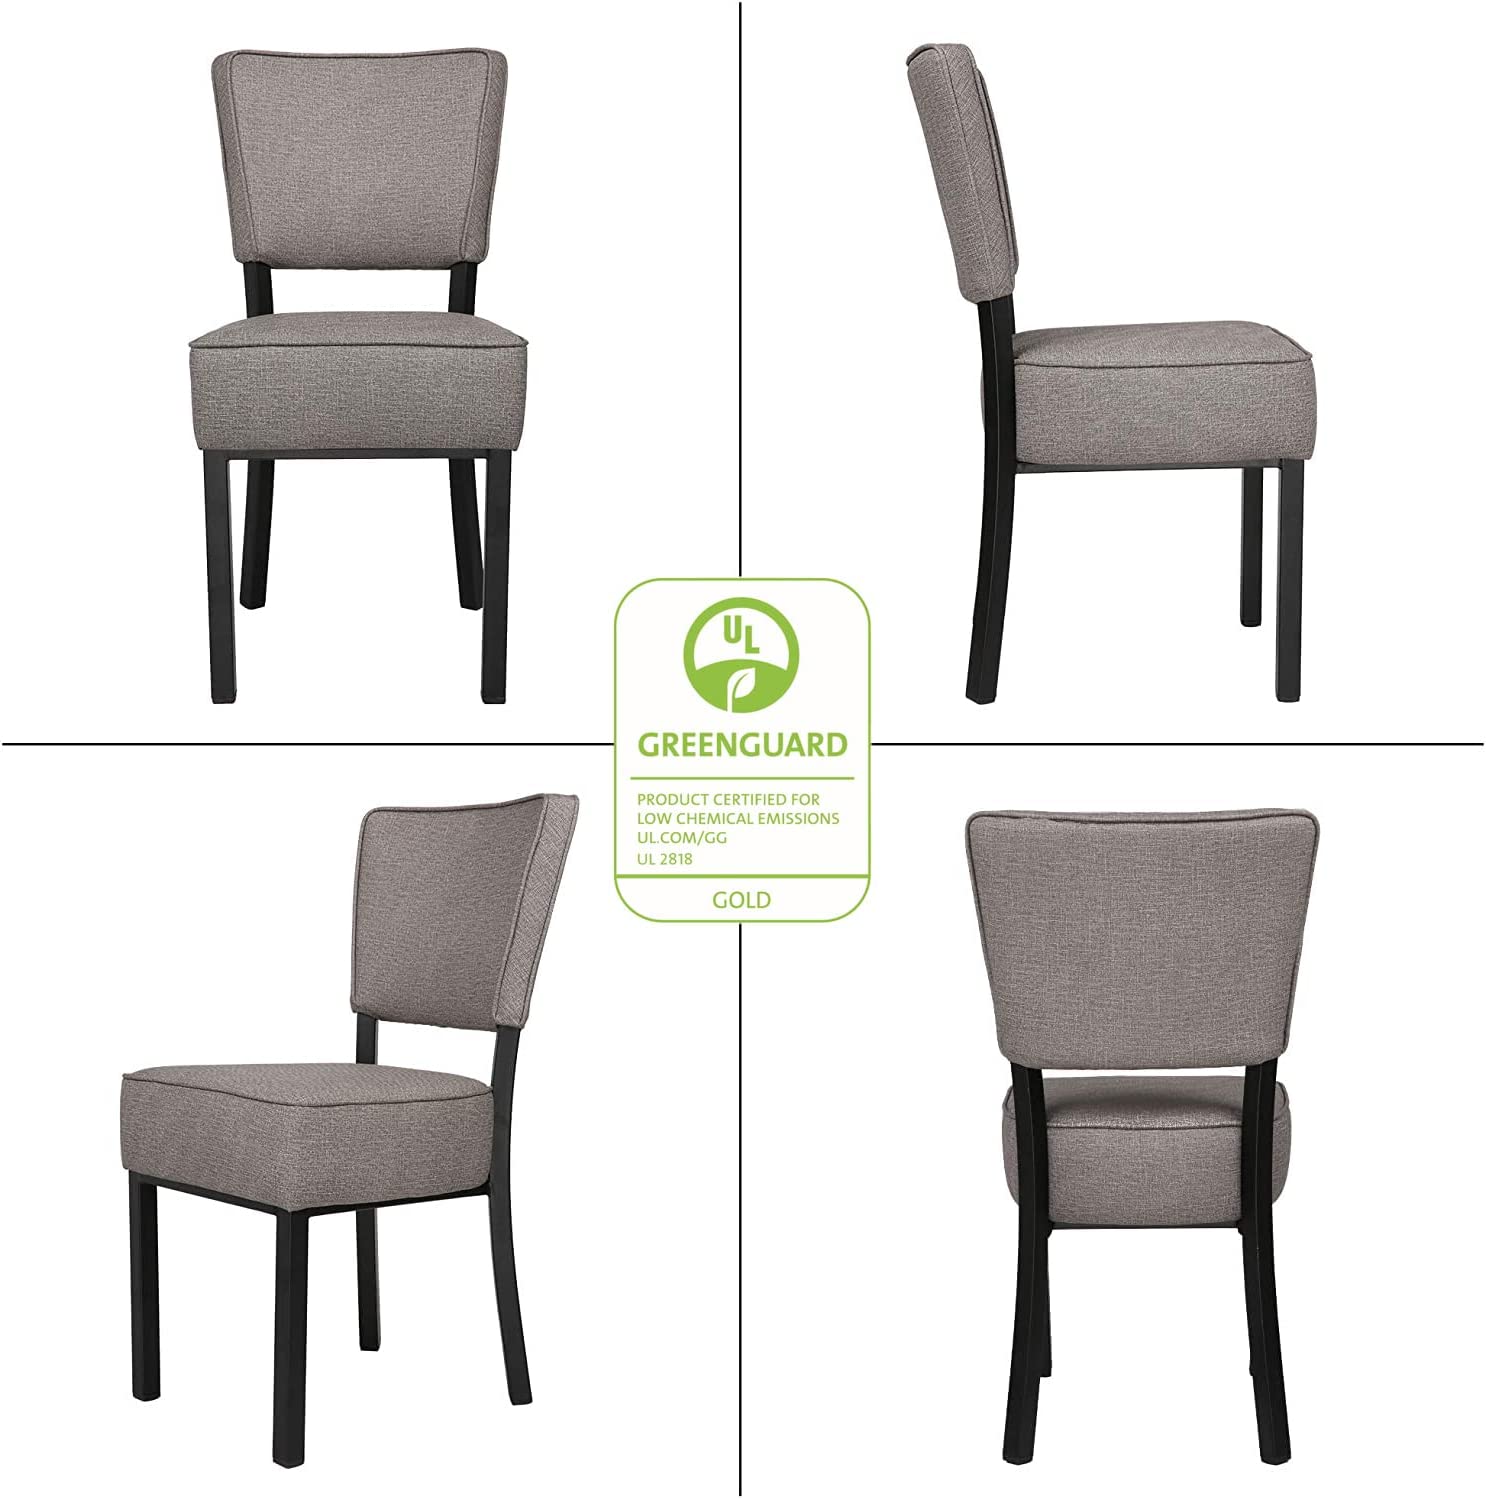 Classic Dining Chair Set of 2, Modern Style Family Leisure Chair with Stainless Steel Legs, PU Leather Mid Back Side Chair, Gray